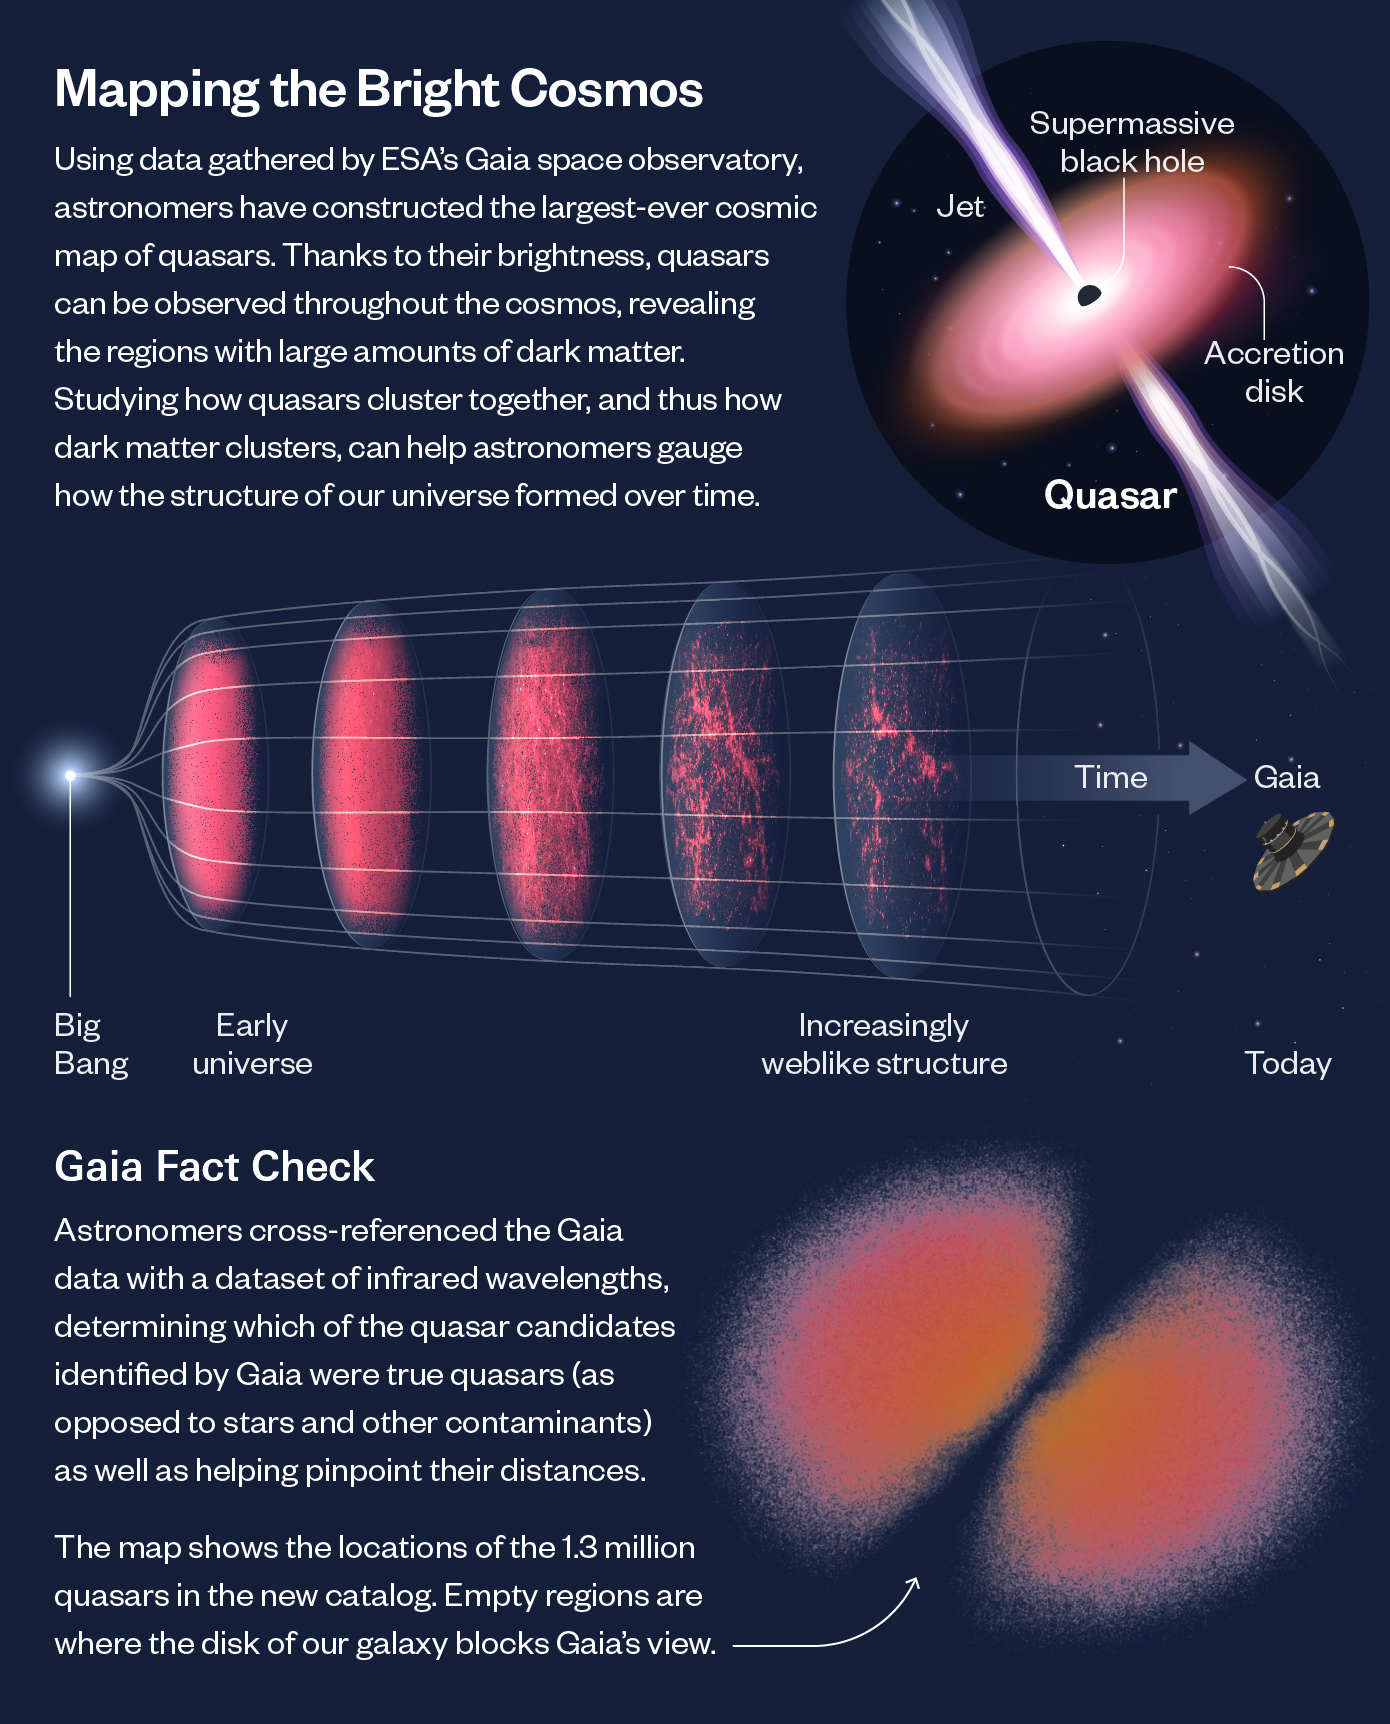 Quasar mapping infographic